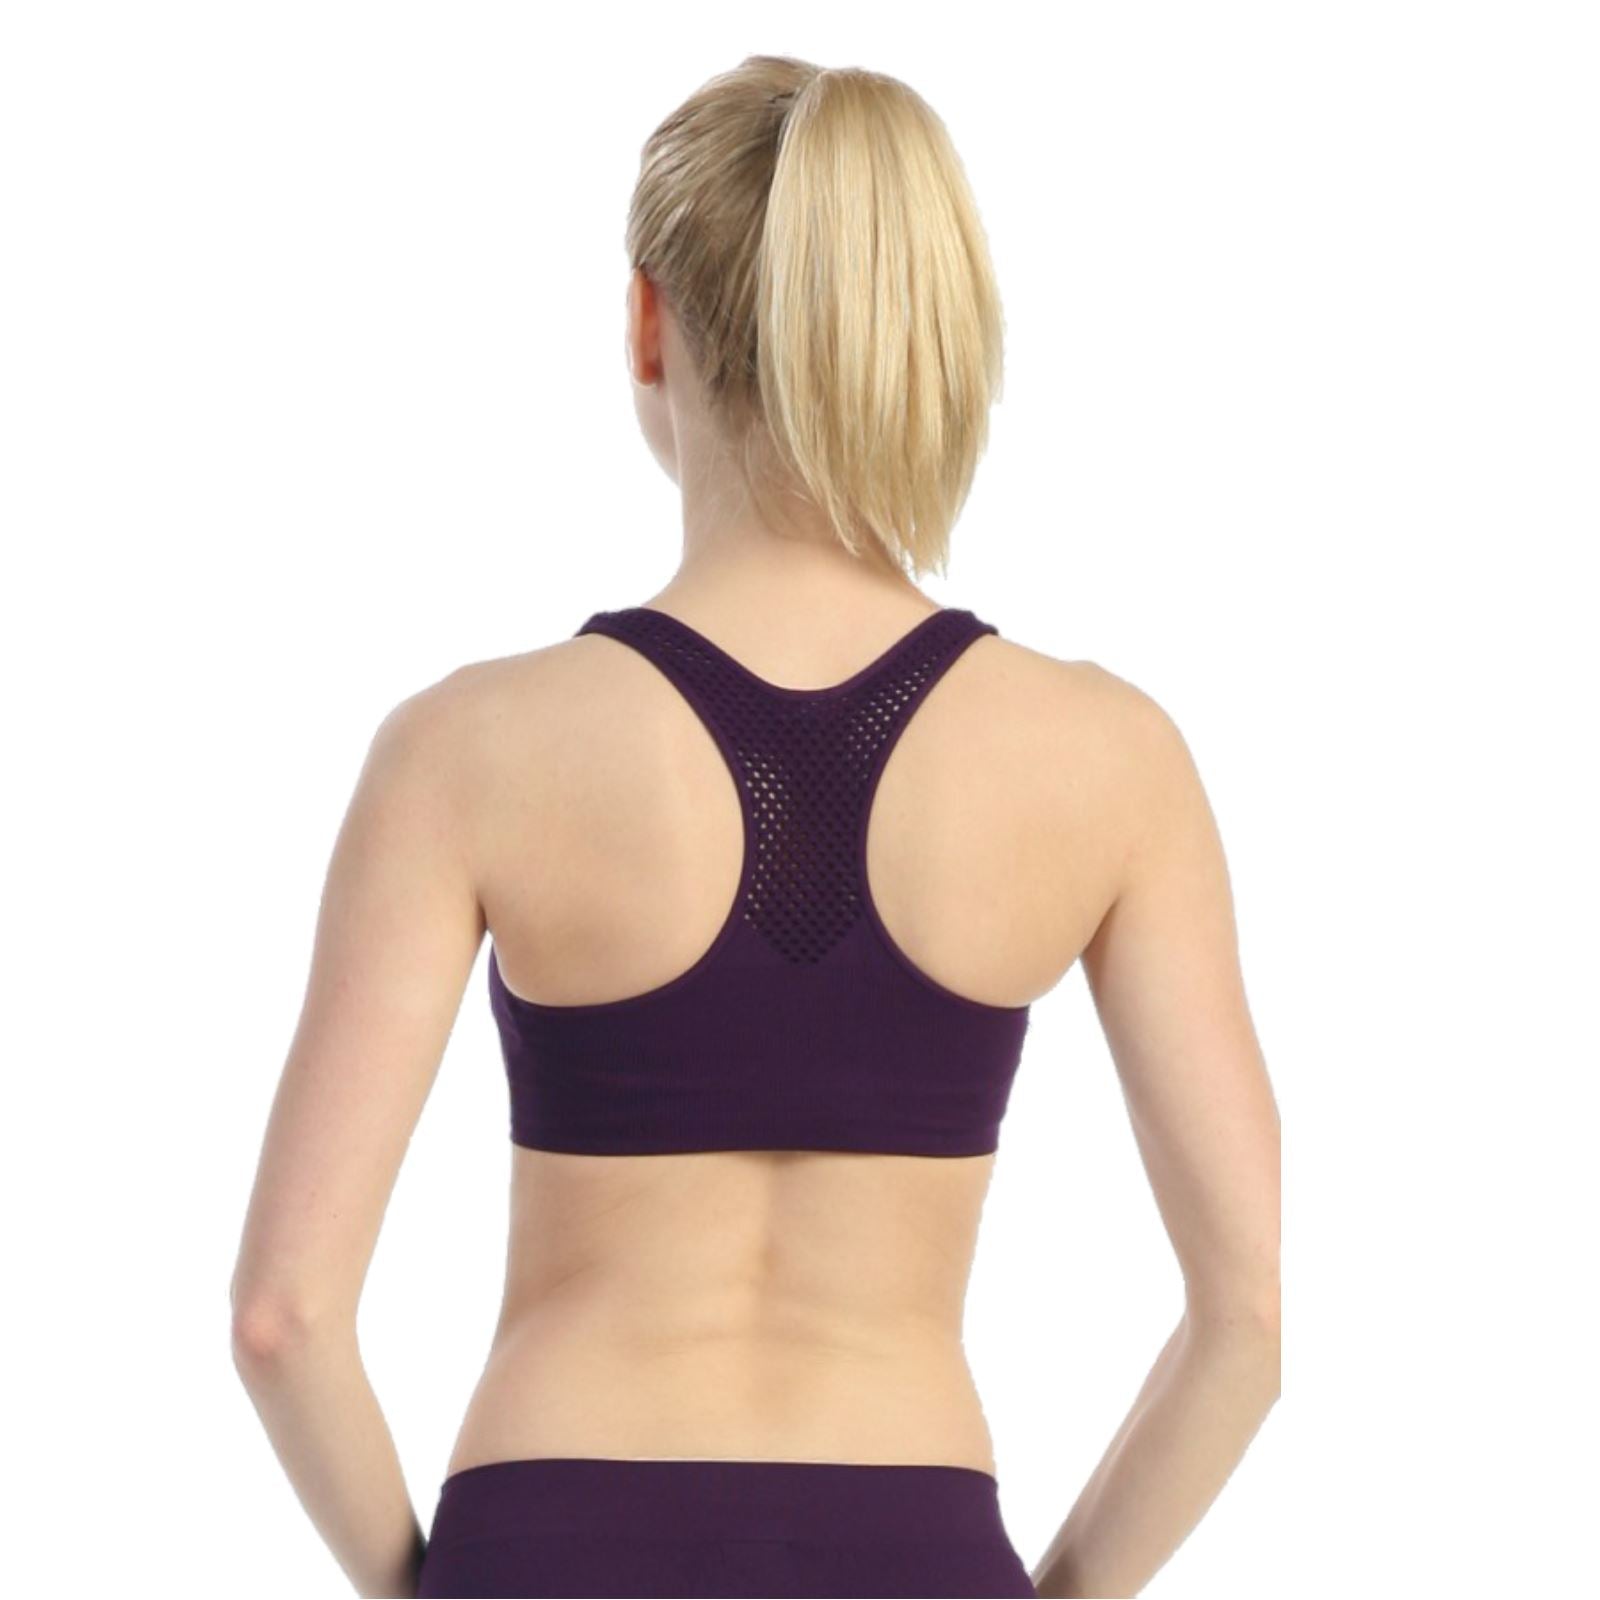 PADDED MESH BACK DOUBLE LAYERED SPORTS BRA TOP